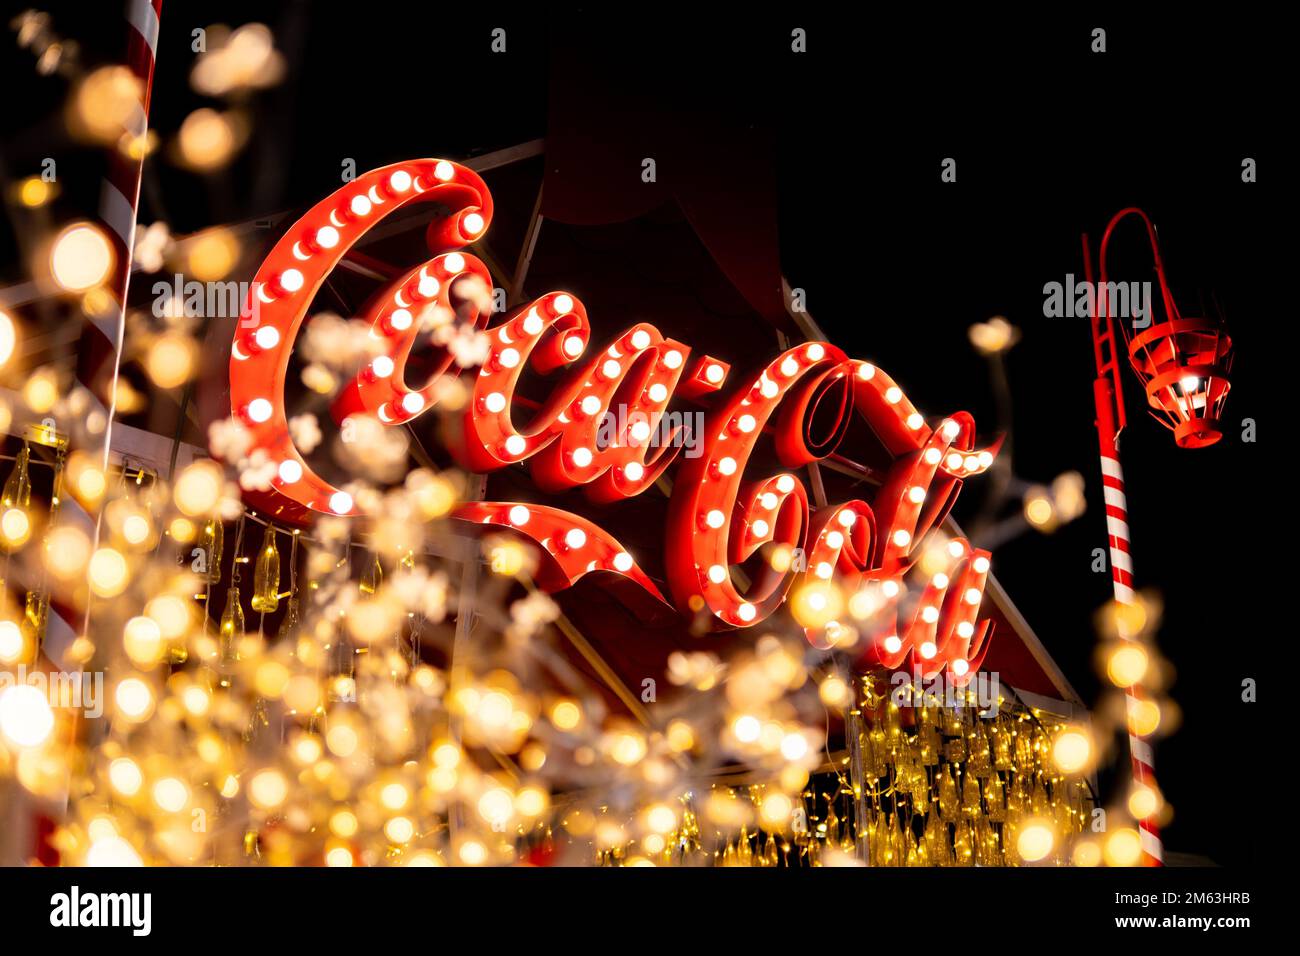 Belgrade, Serbia - December 23, 2022: Coca Cola logo at exhibition stand in the streets of Belgrade on Christmas holidays in the night. Stock Photo